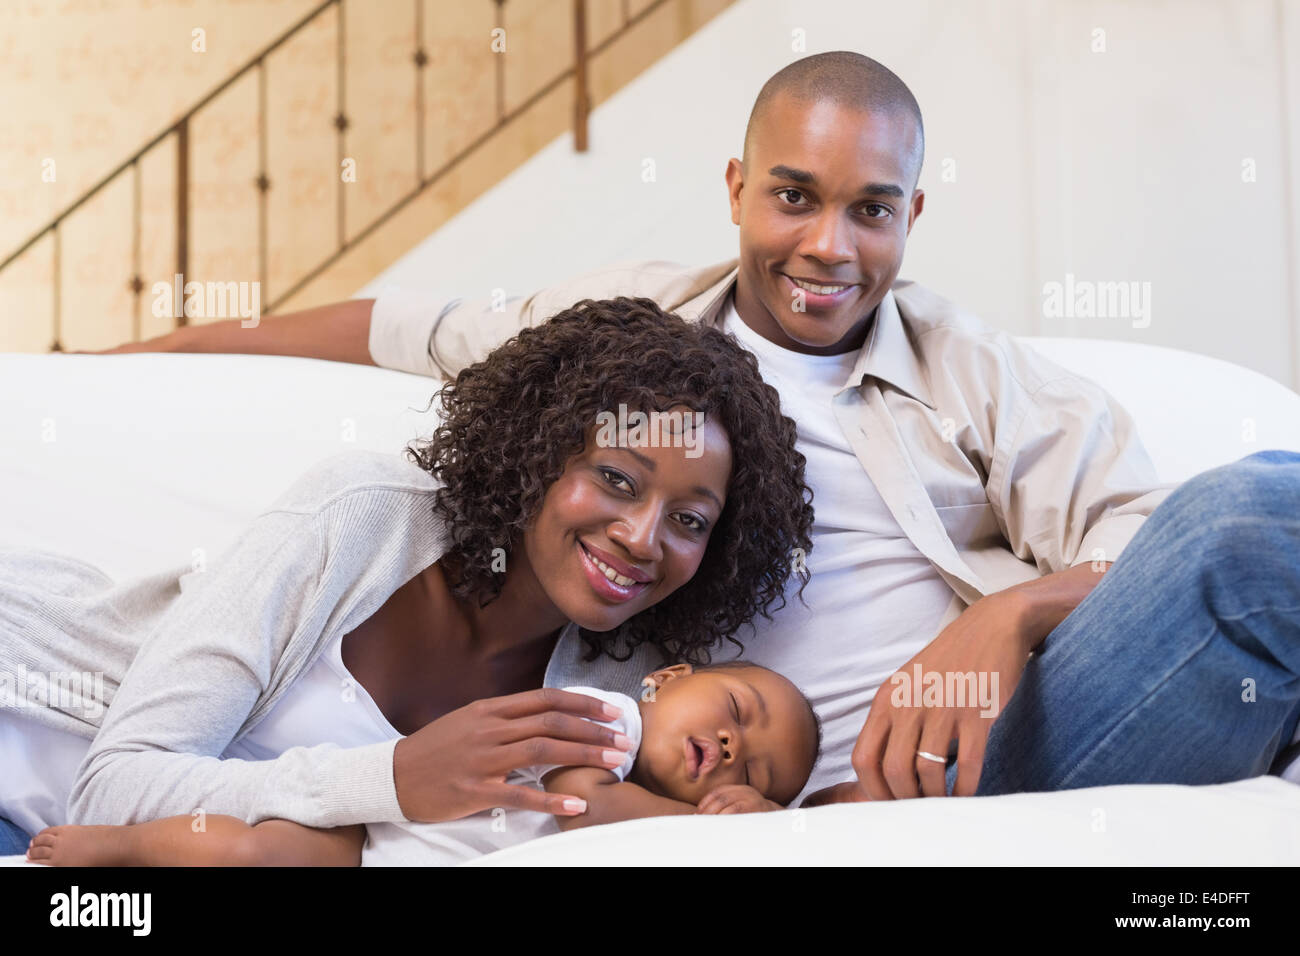 Adorable baby boy sleeping while being watched by parents Stock Photo